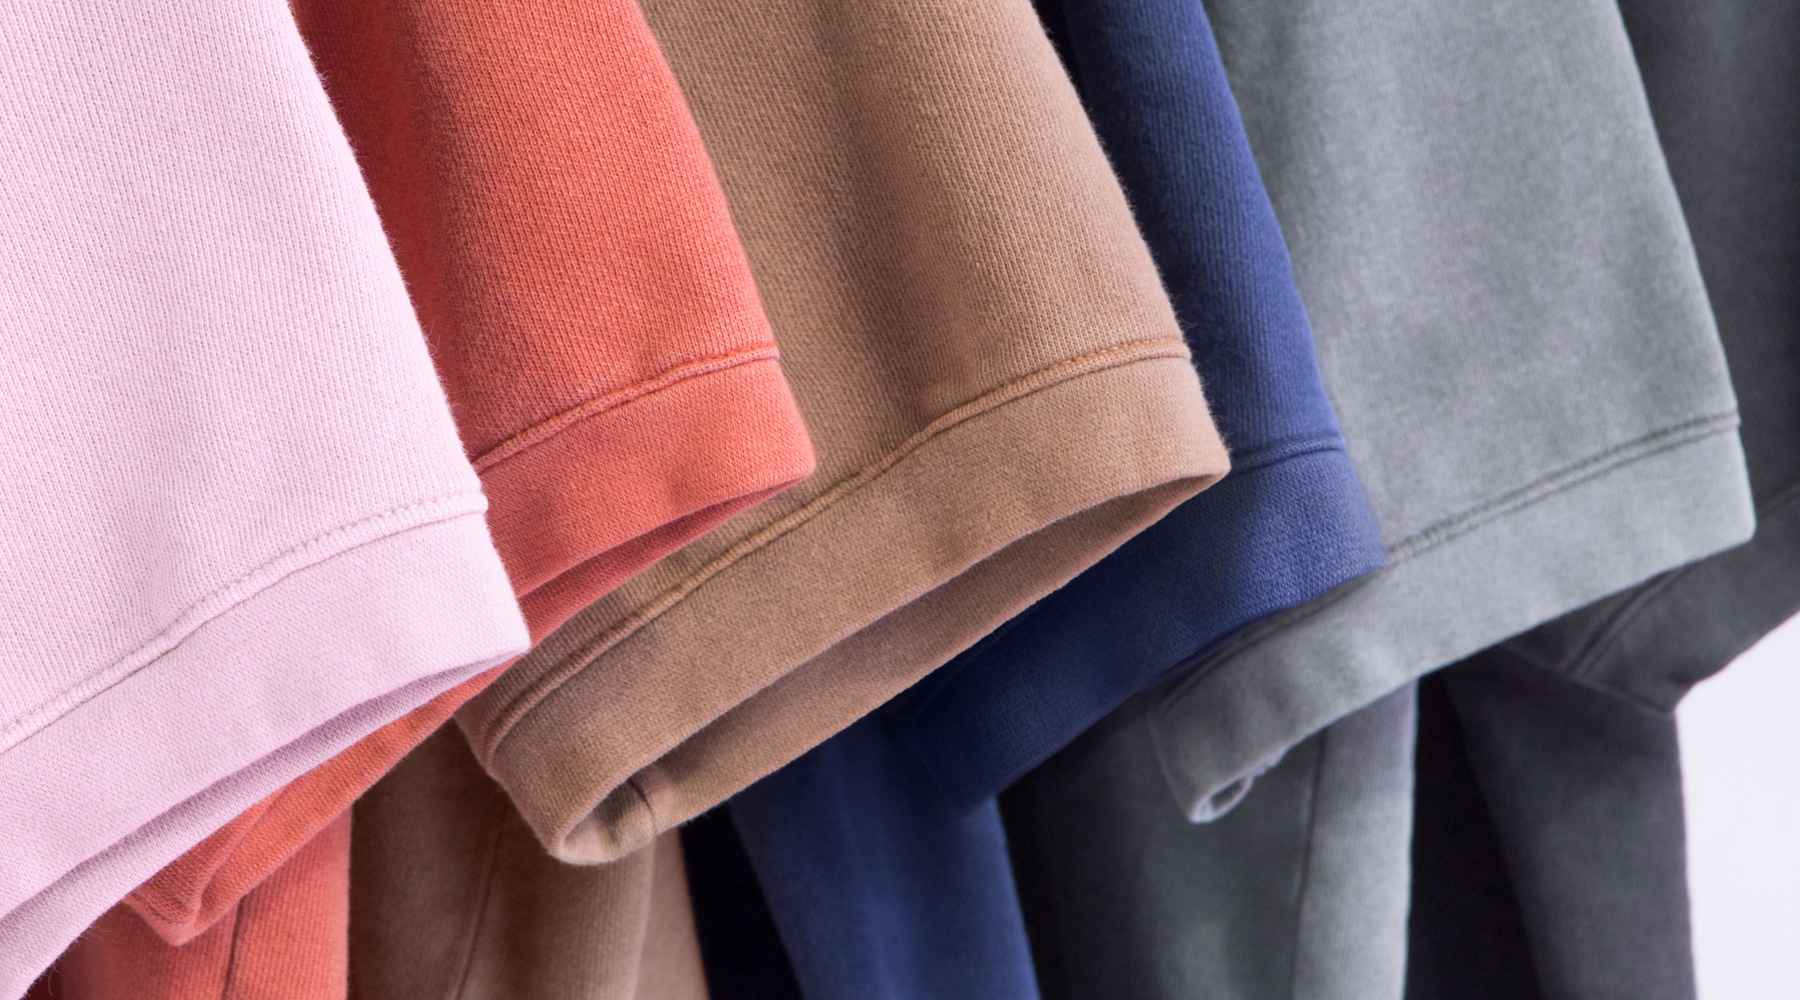 A close-up of various colored American Apparel™ t-shirt sleeves.